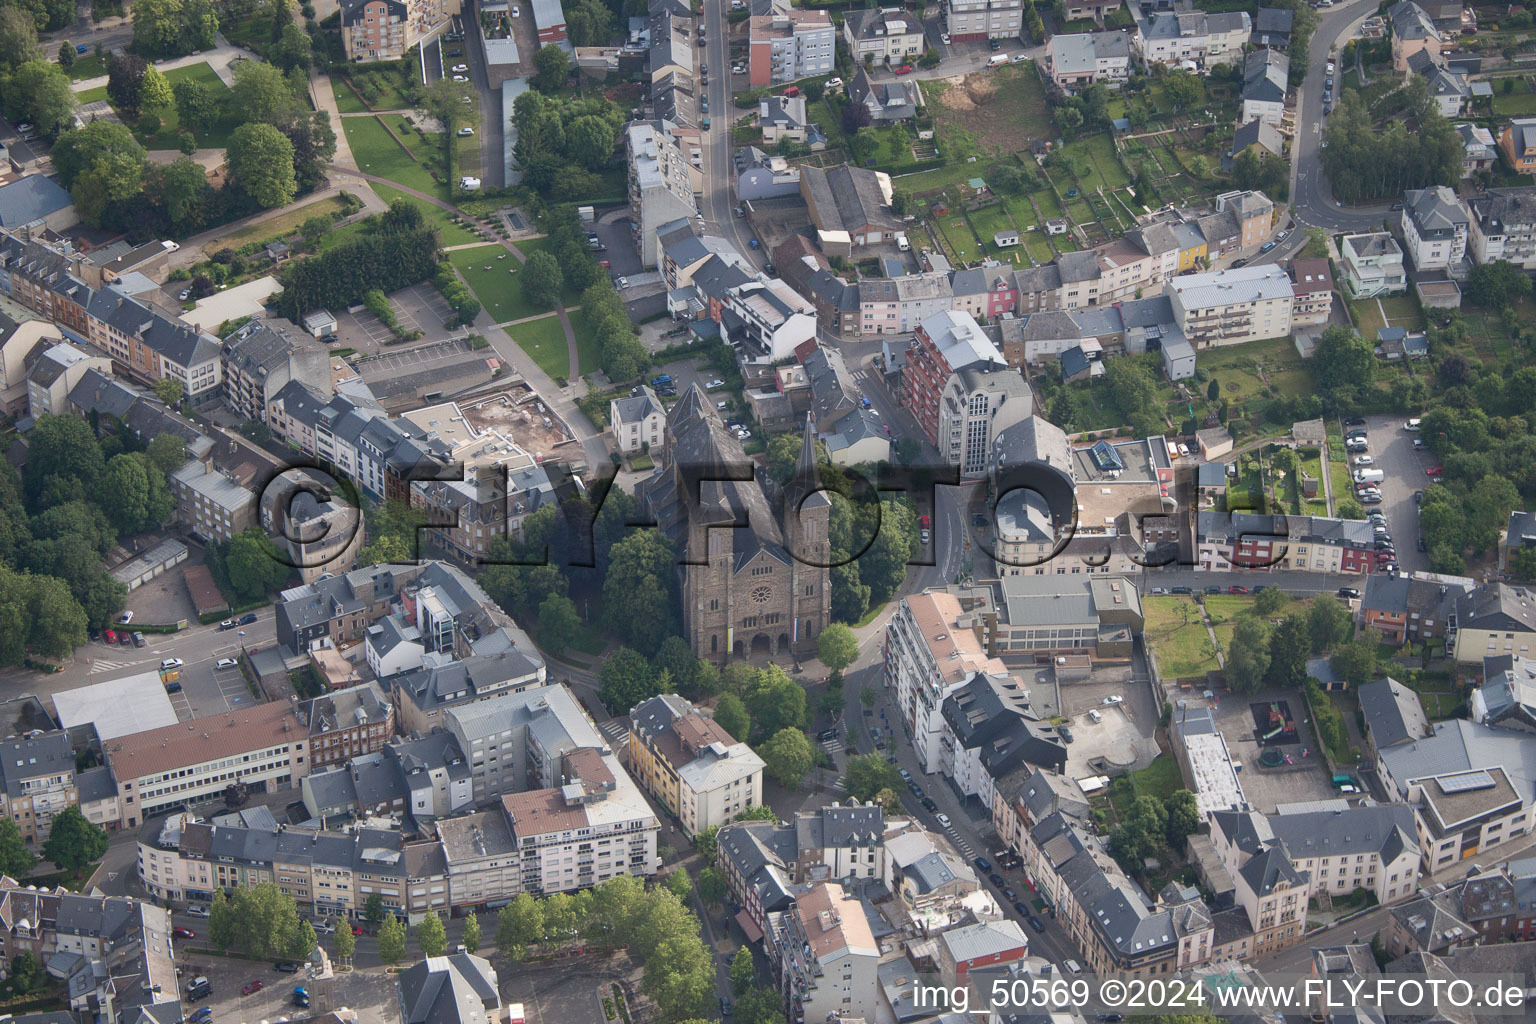 Aerial view of Church building in Old Town- center of downtown in Dudelange in District de Luxembourg, Luxembourg